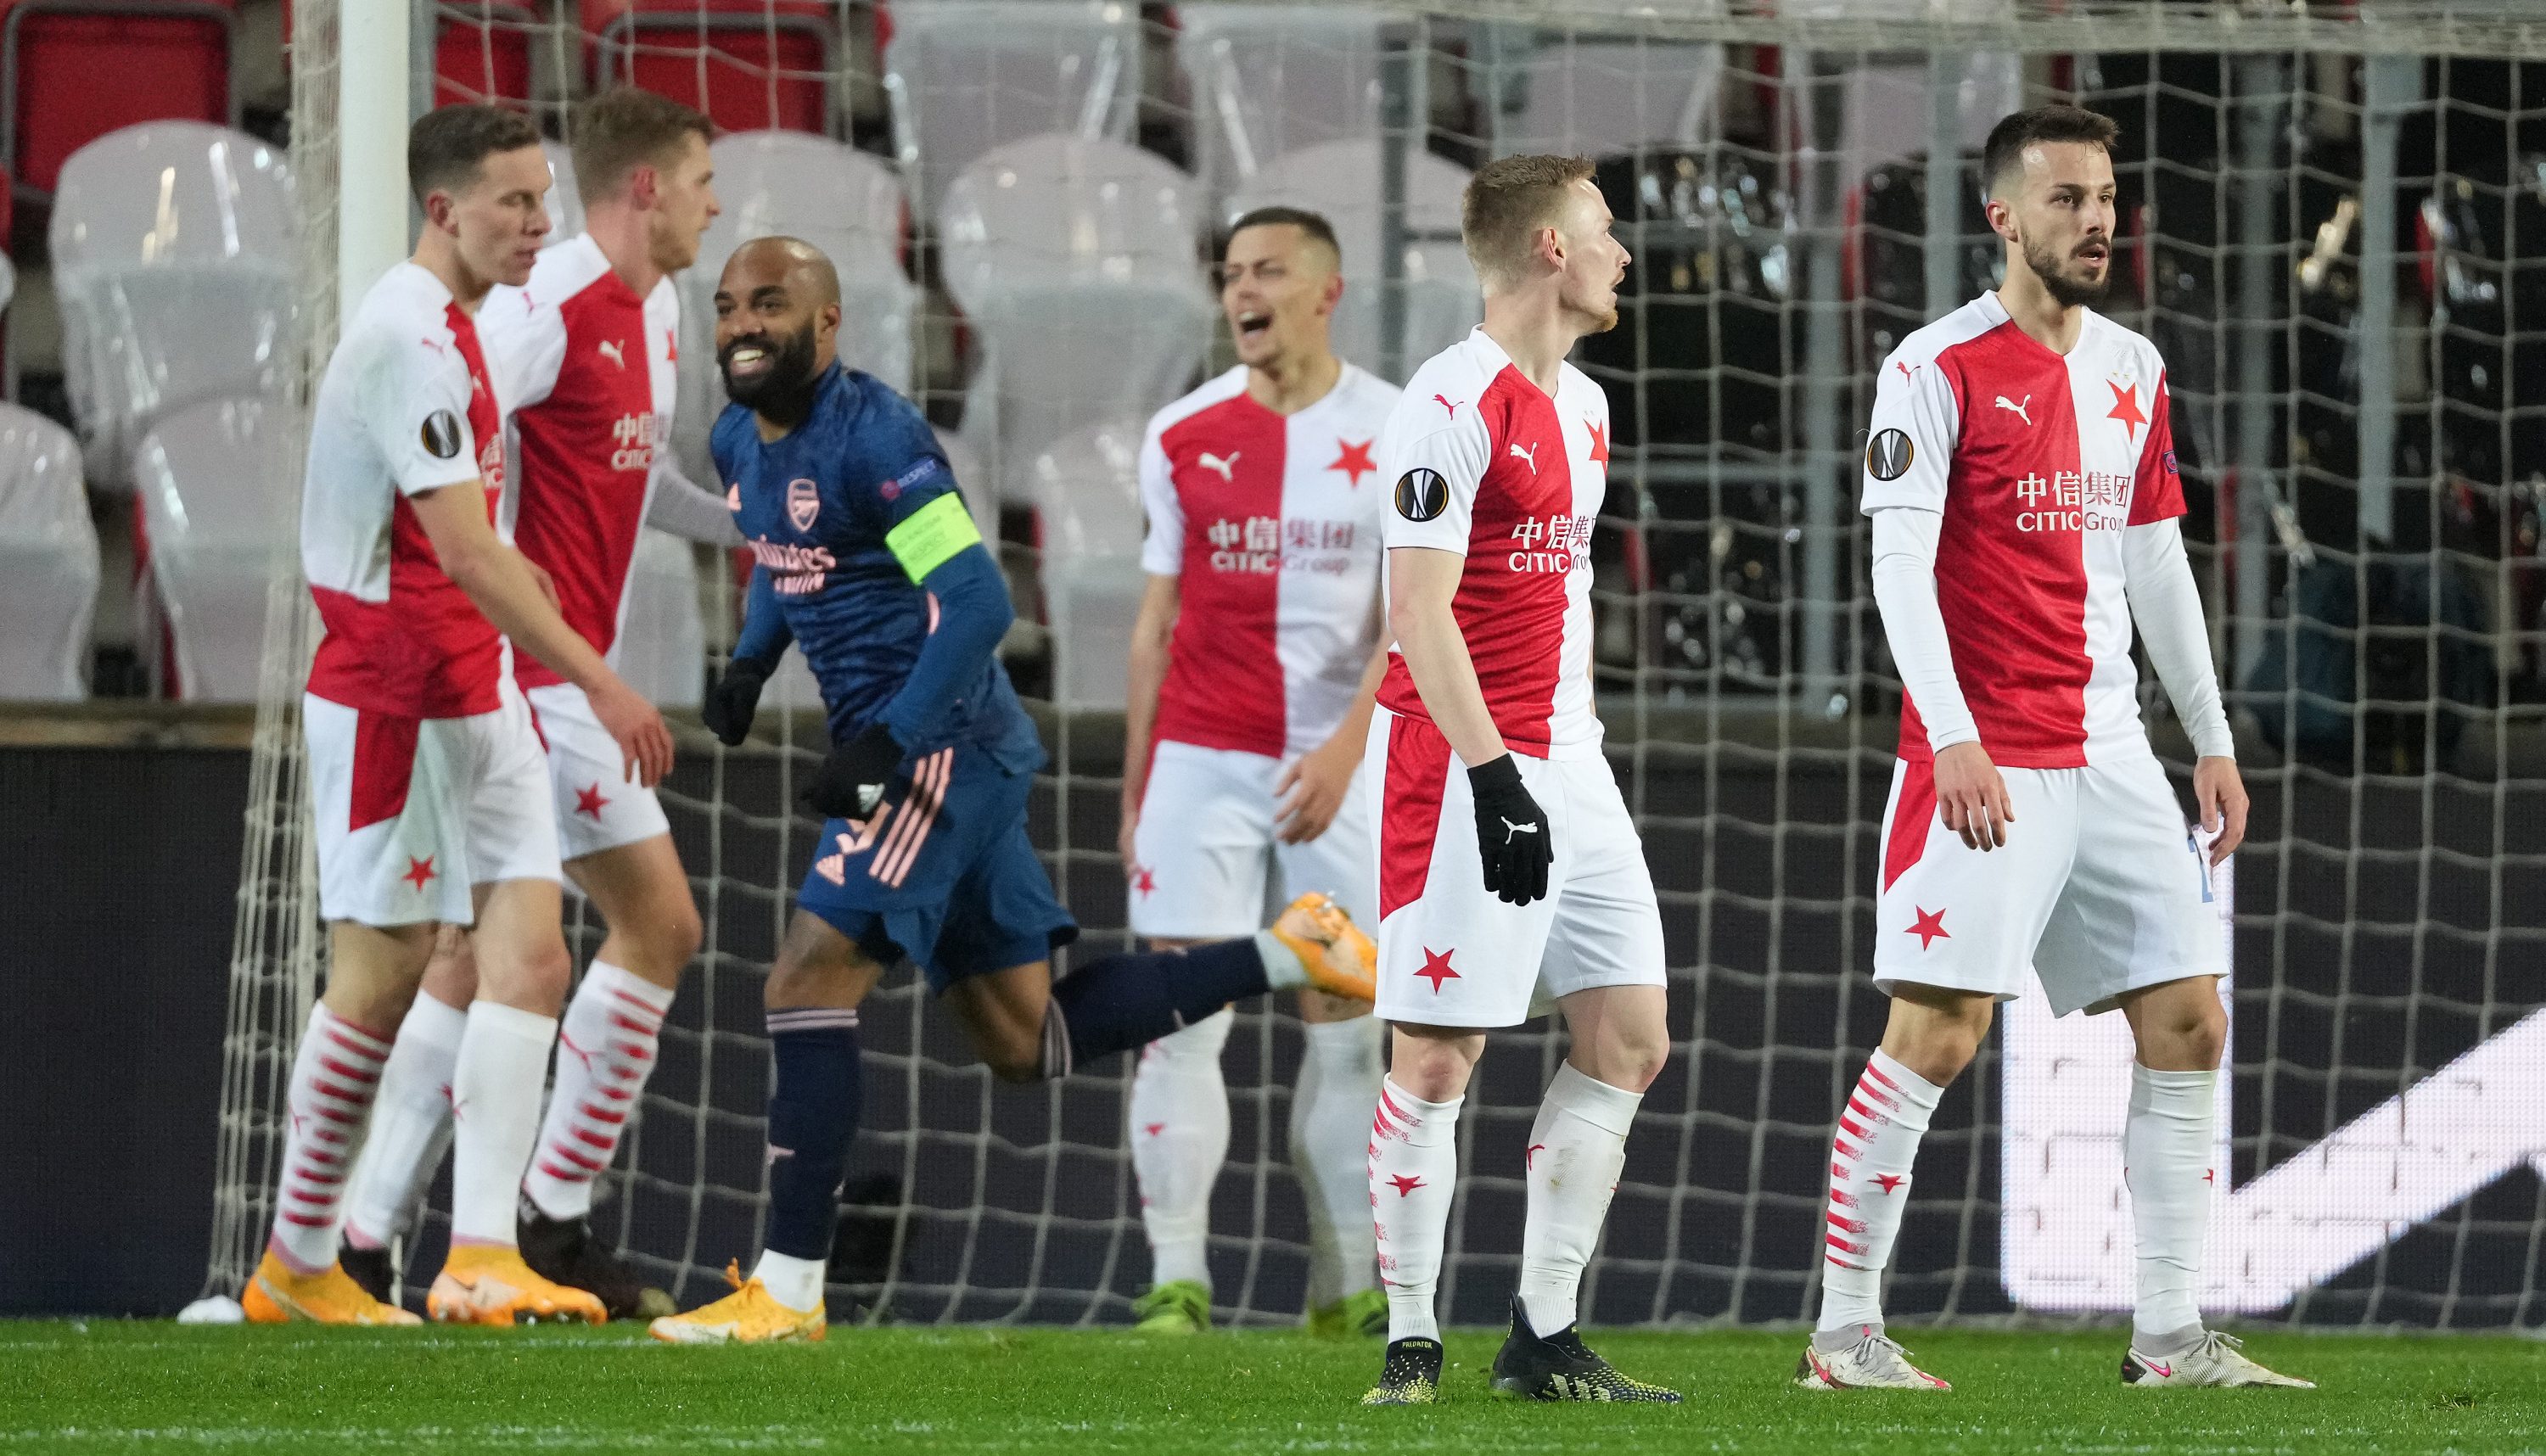 Players of Slavia Praha look dejected after Alexandre Lacazette of Arsenal scored his team's second goal from the penalty spot during the UEFA Europa League Quarter Final Second Leg match between Slavia Praha and Arsenal FC at Sinobo Stadium on April 15, 2021 in Prague, Czech Republic